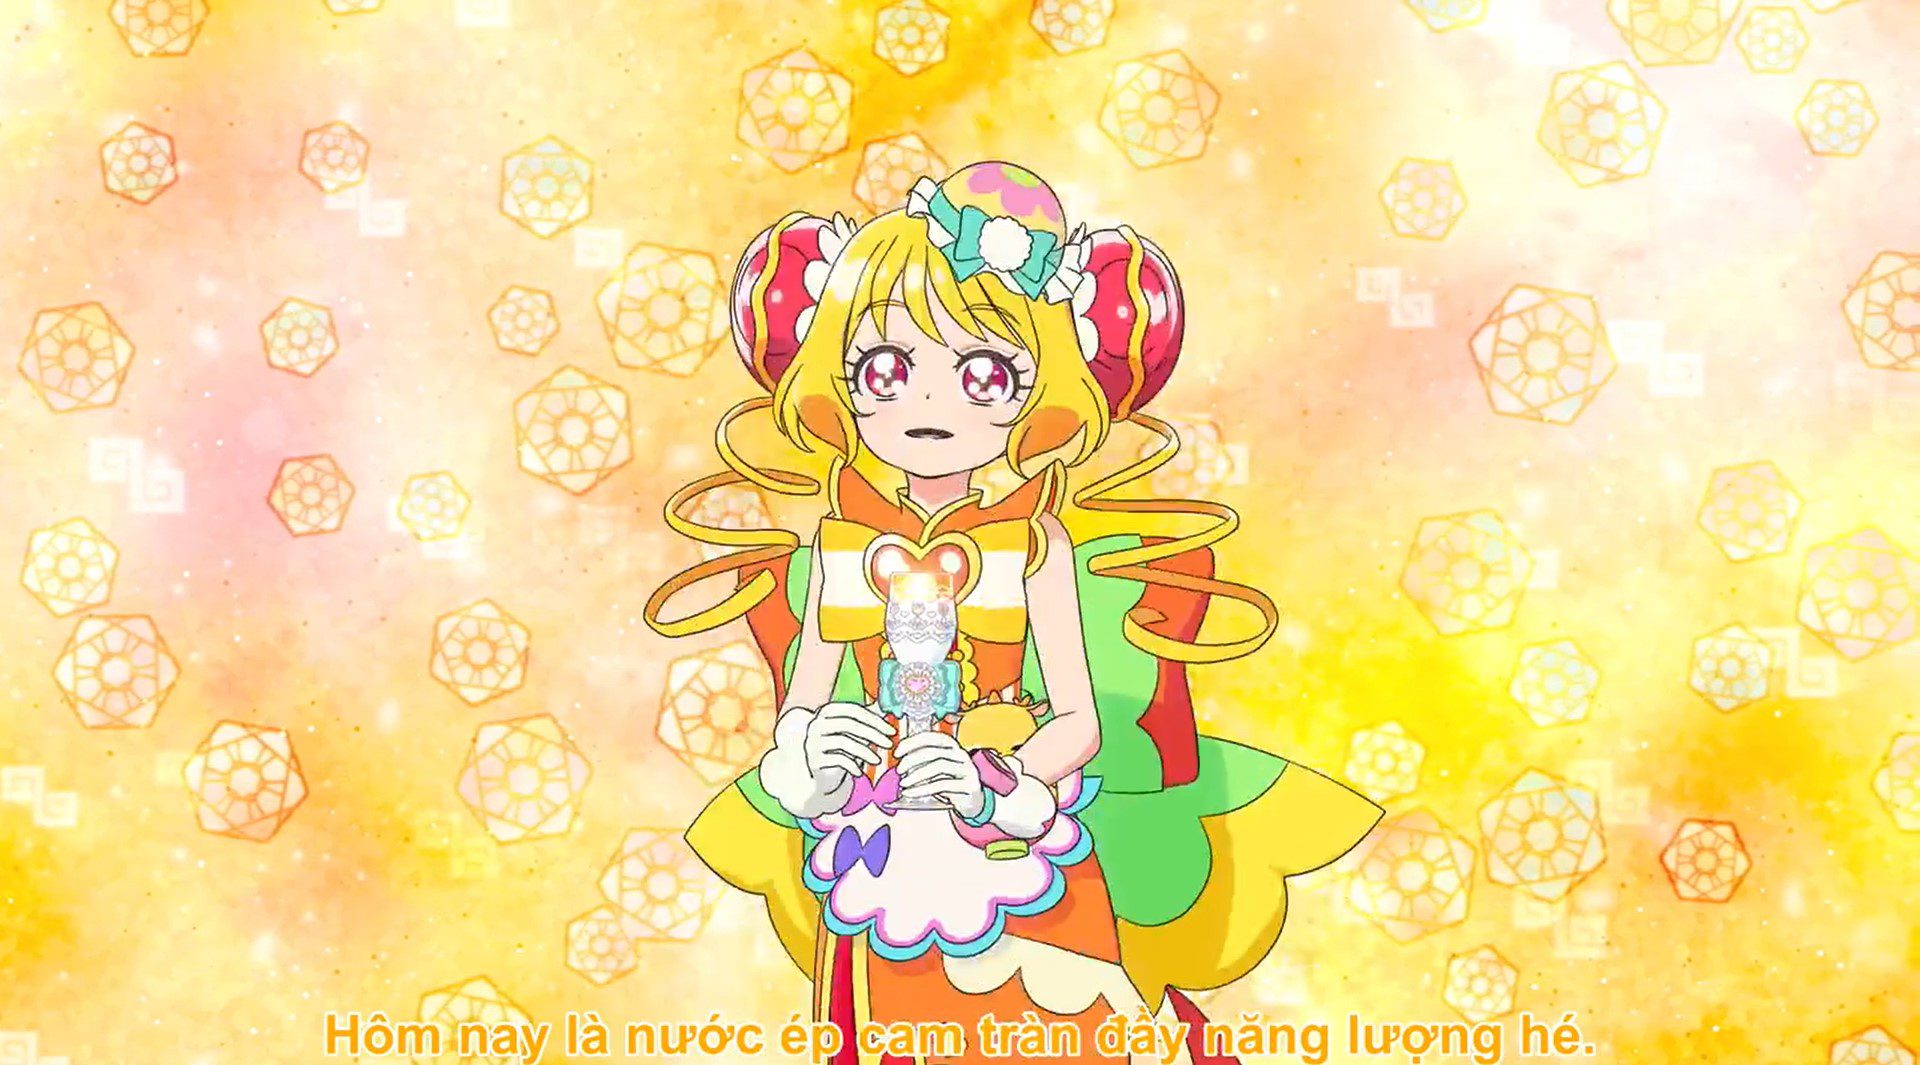 Delicious Party Pretty Cure Episode 28 Release Date